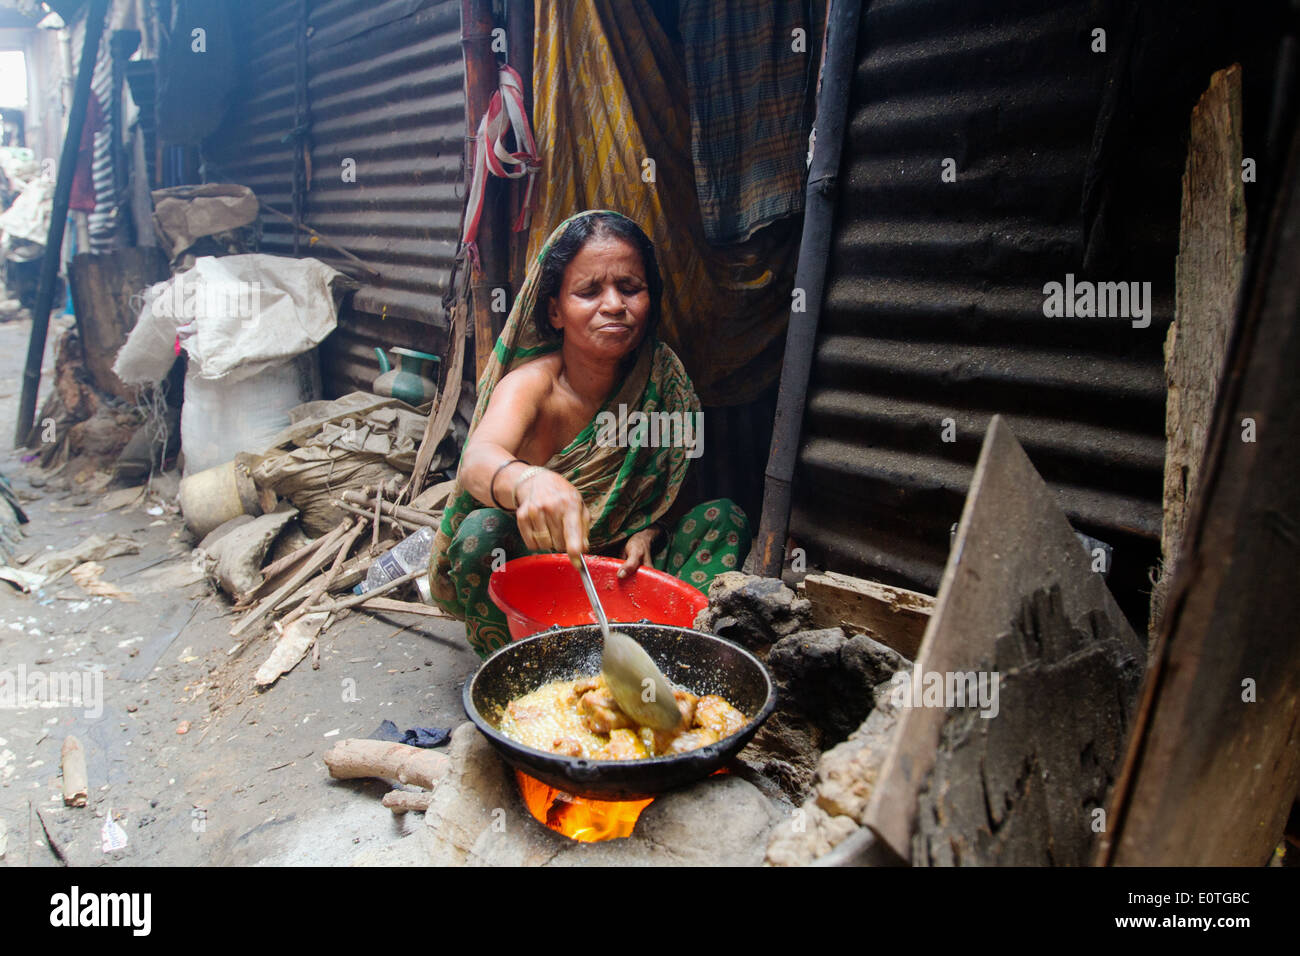 Bangladeshi people in shanty part of Dhaka living in extreme poverty. Stock Photo